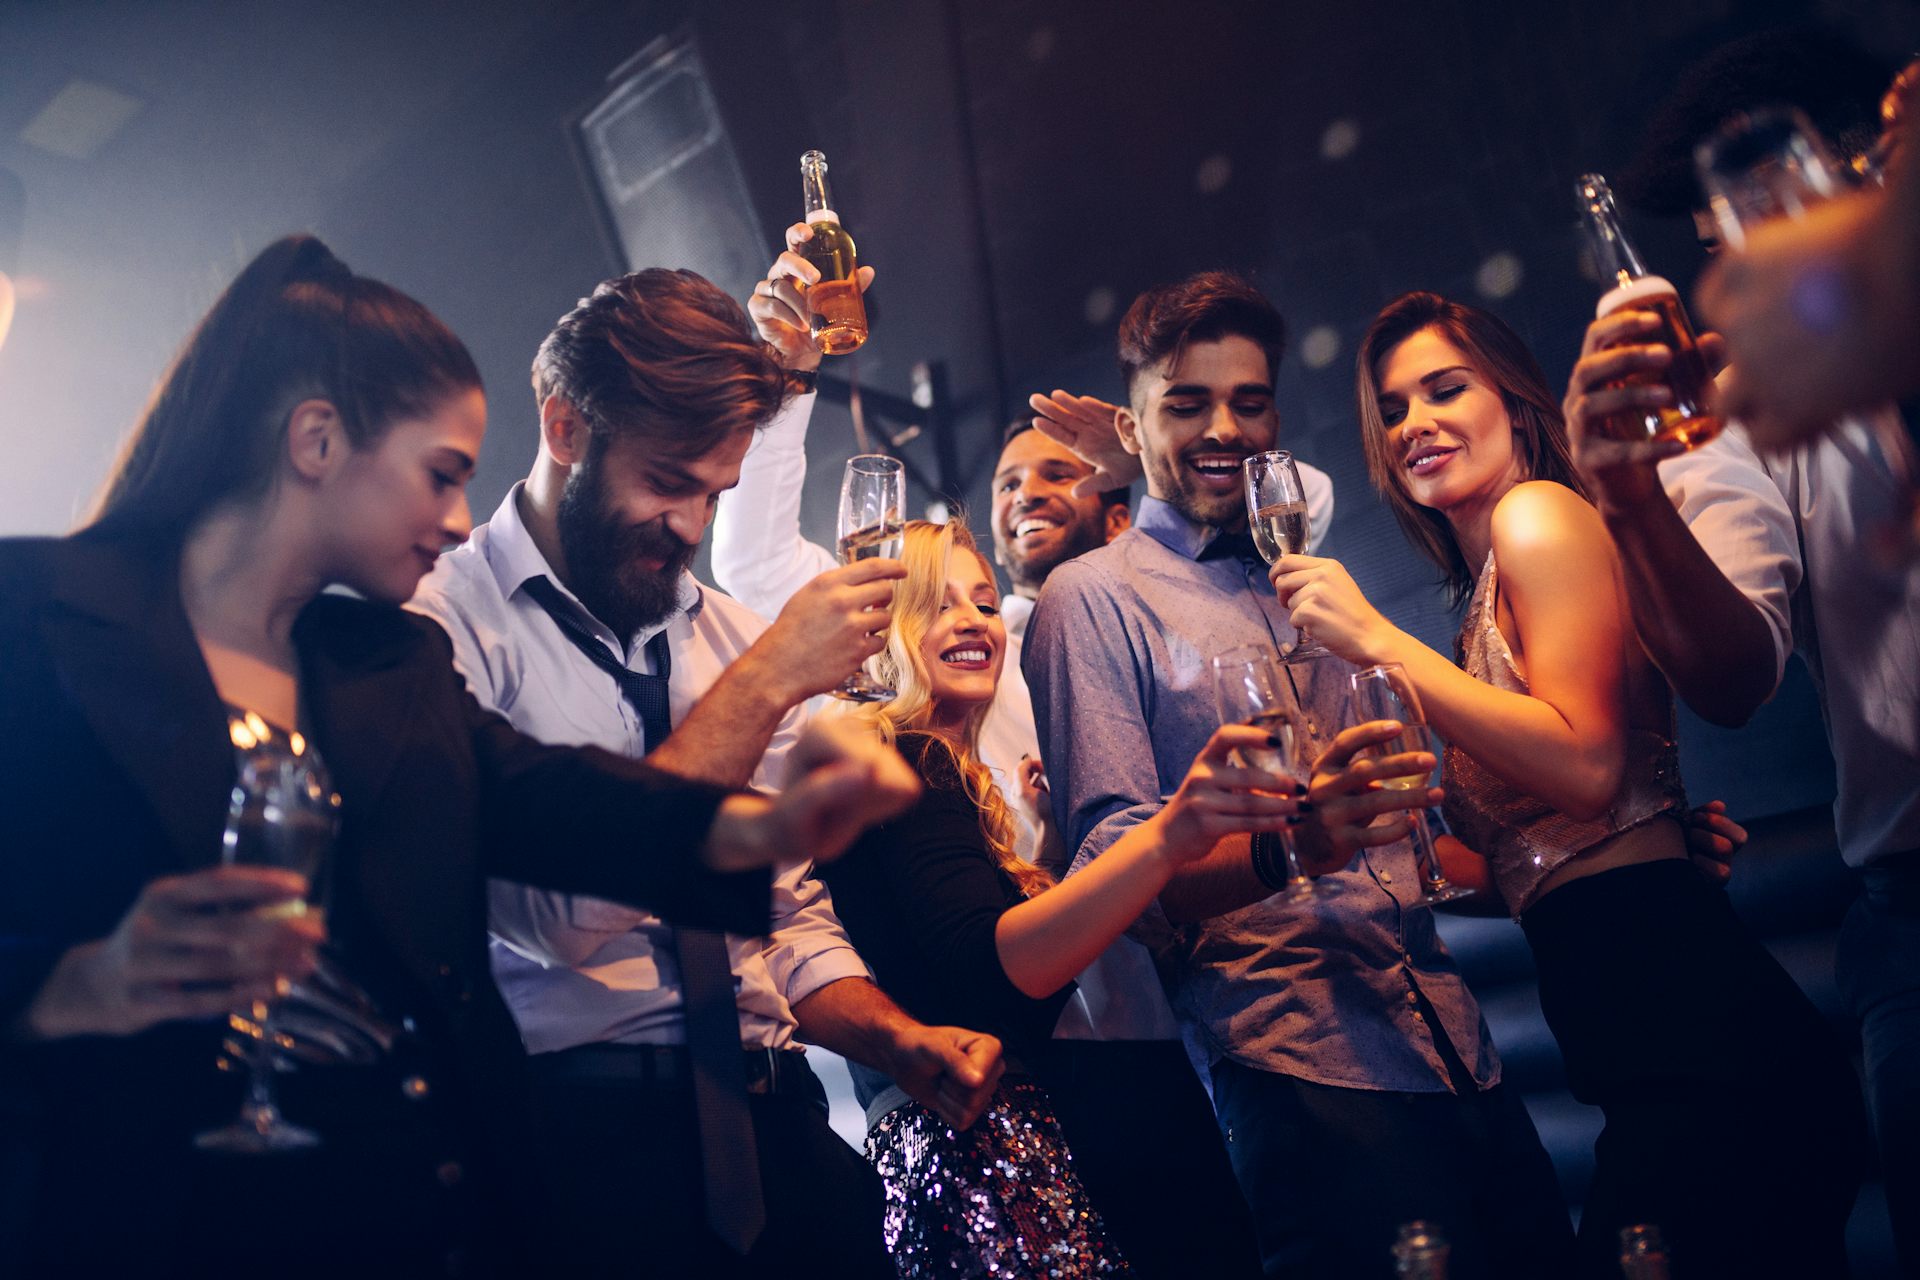 Groping, grinding, grabbing new research on nightclubs finds men do it often but know its wrong pic